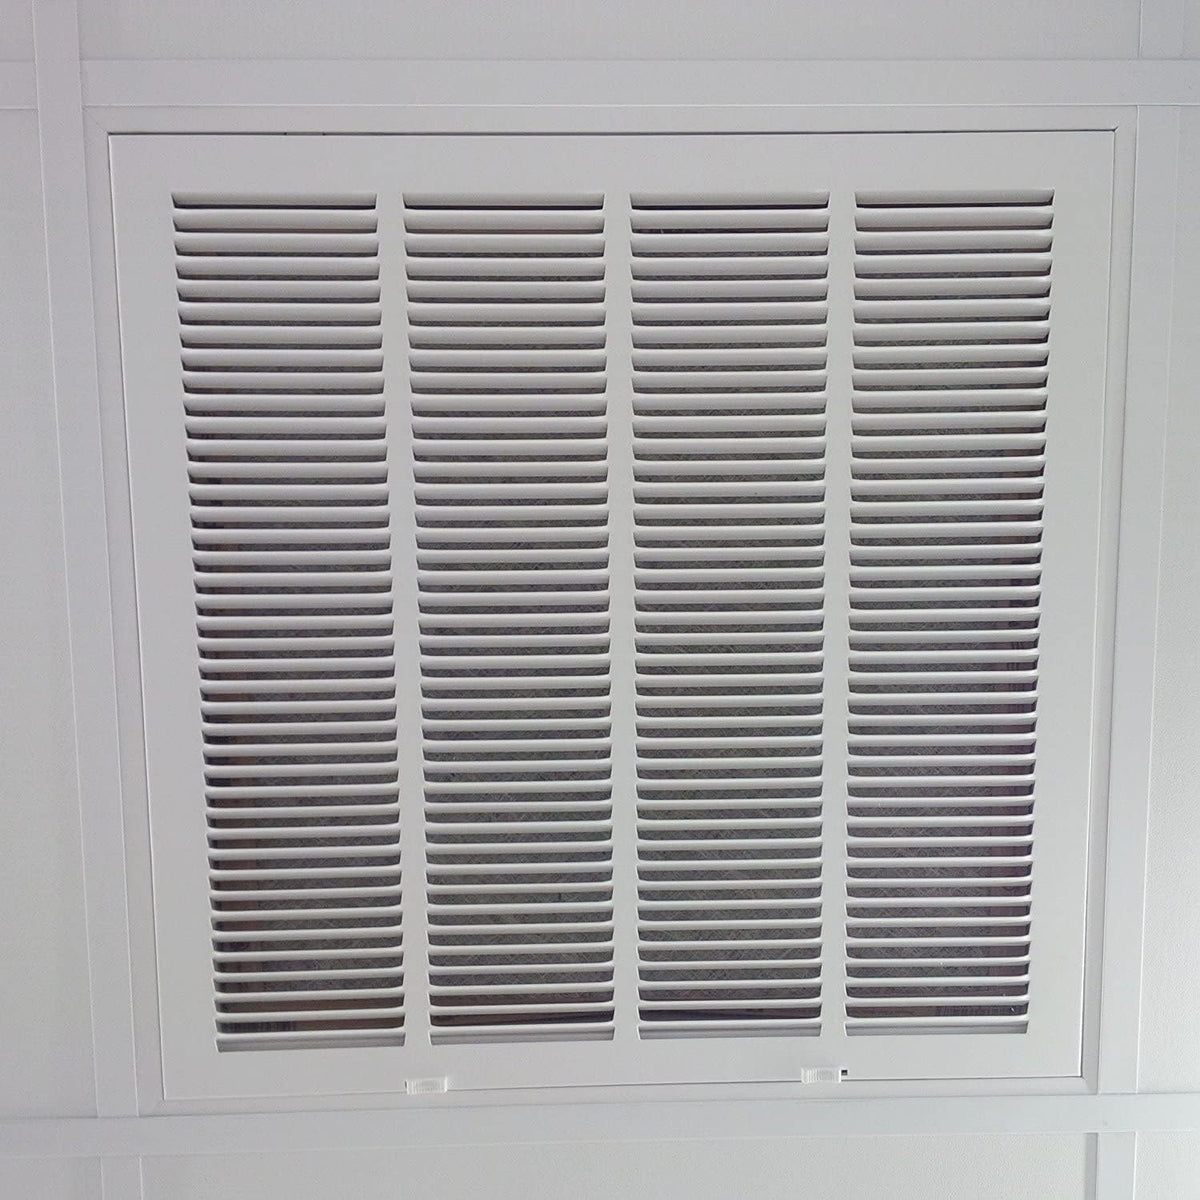 24&quot; x 24&quot; RETURN FILTER GRILLE for Drop Ceiling - Uses 20&quot; x 20&quot; Filter - Easy Access Door &amp; Latch To Filter